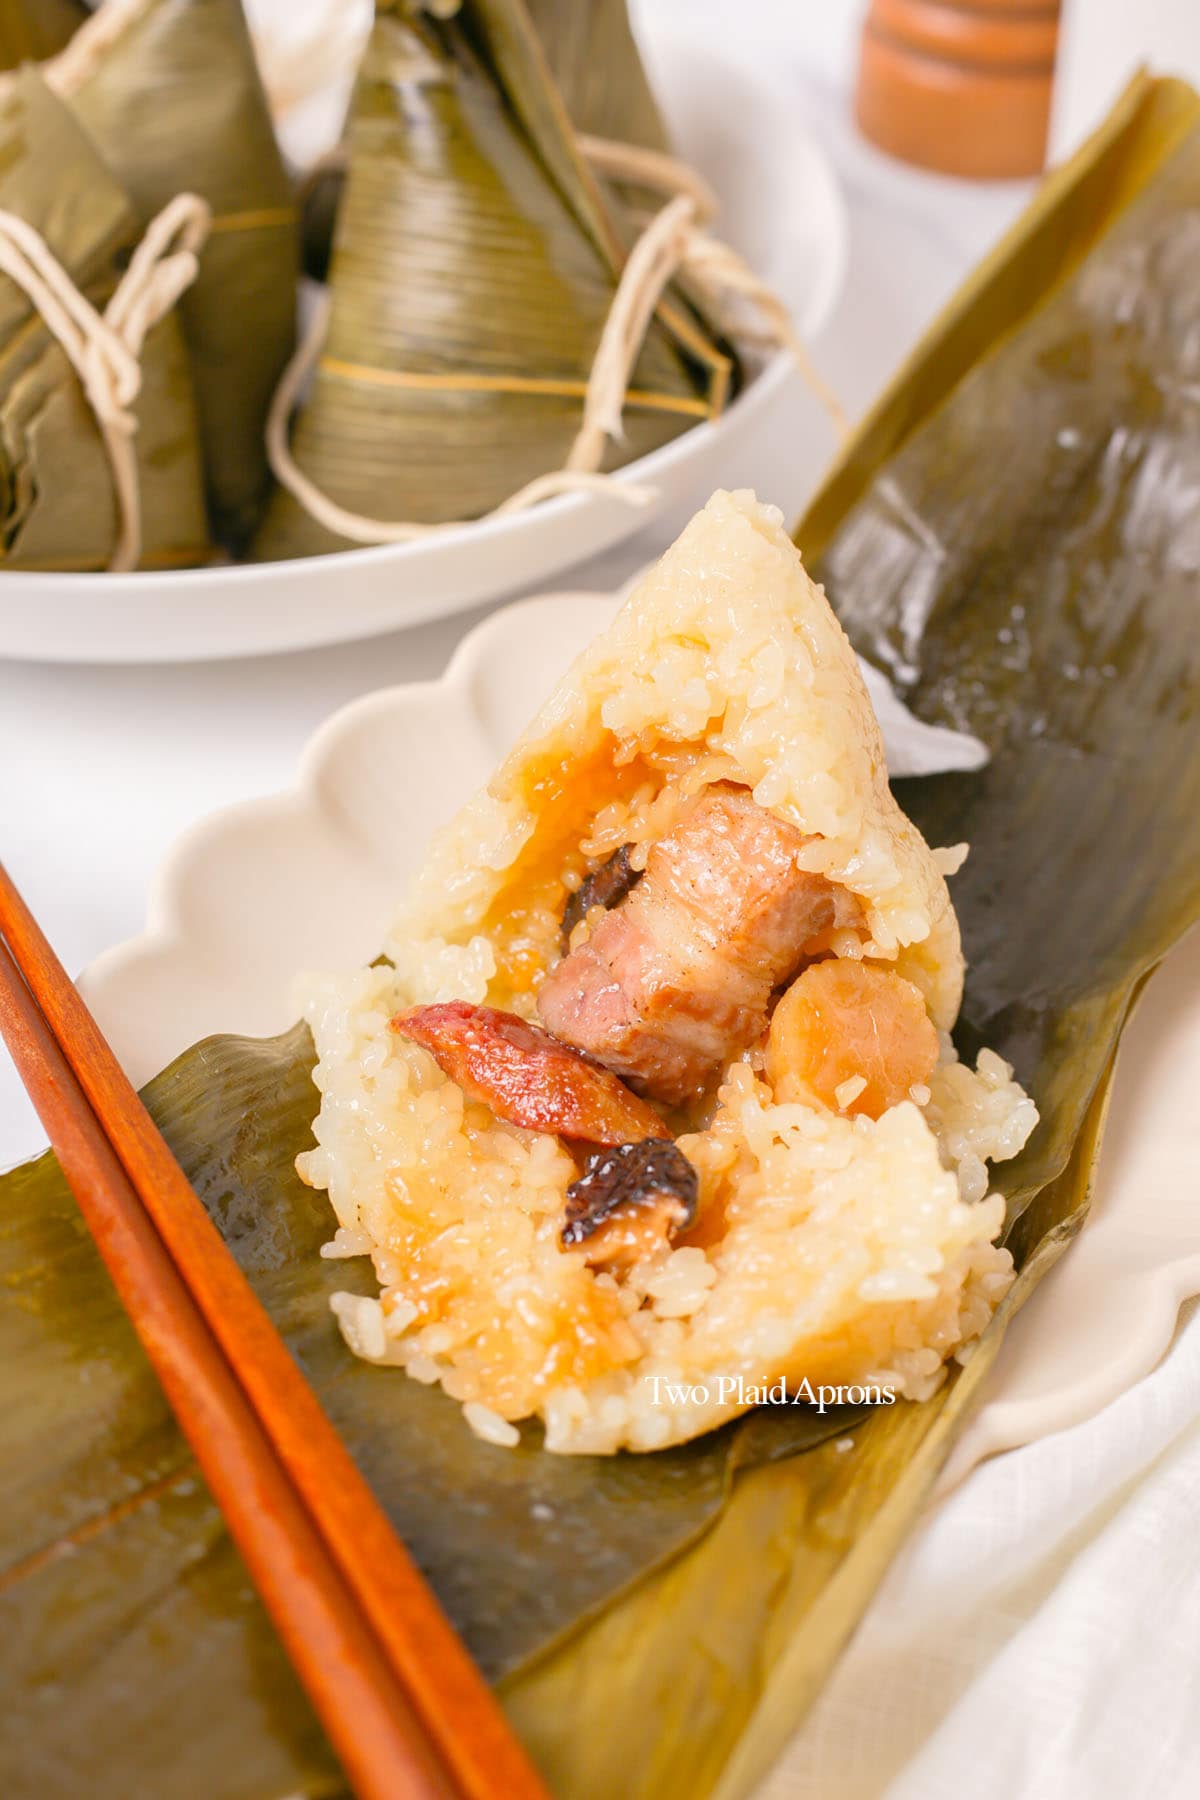 Zongzi with rice opened to show filling.